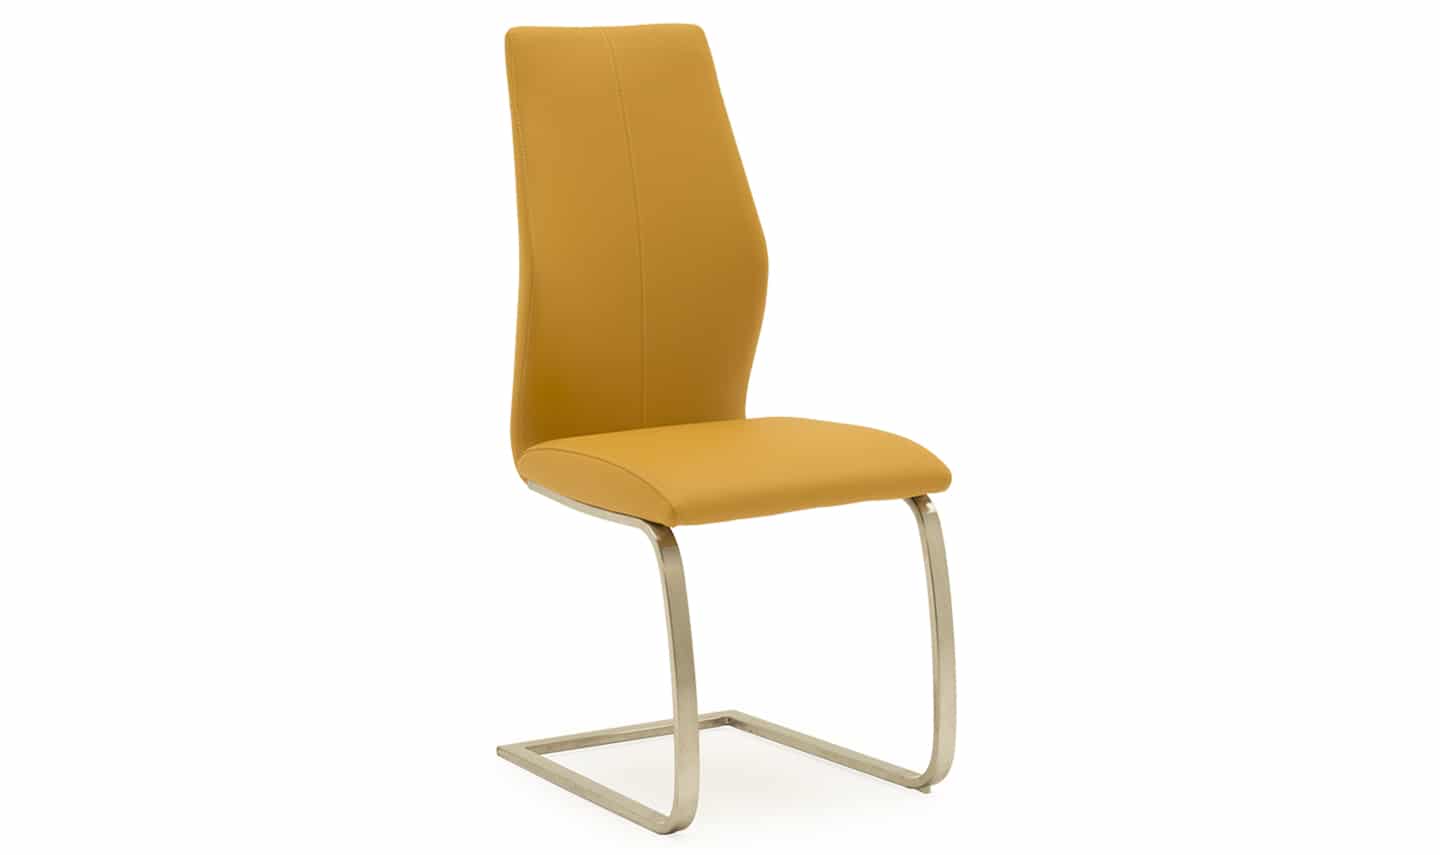 Irma Dining Chair - Brushed Steel